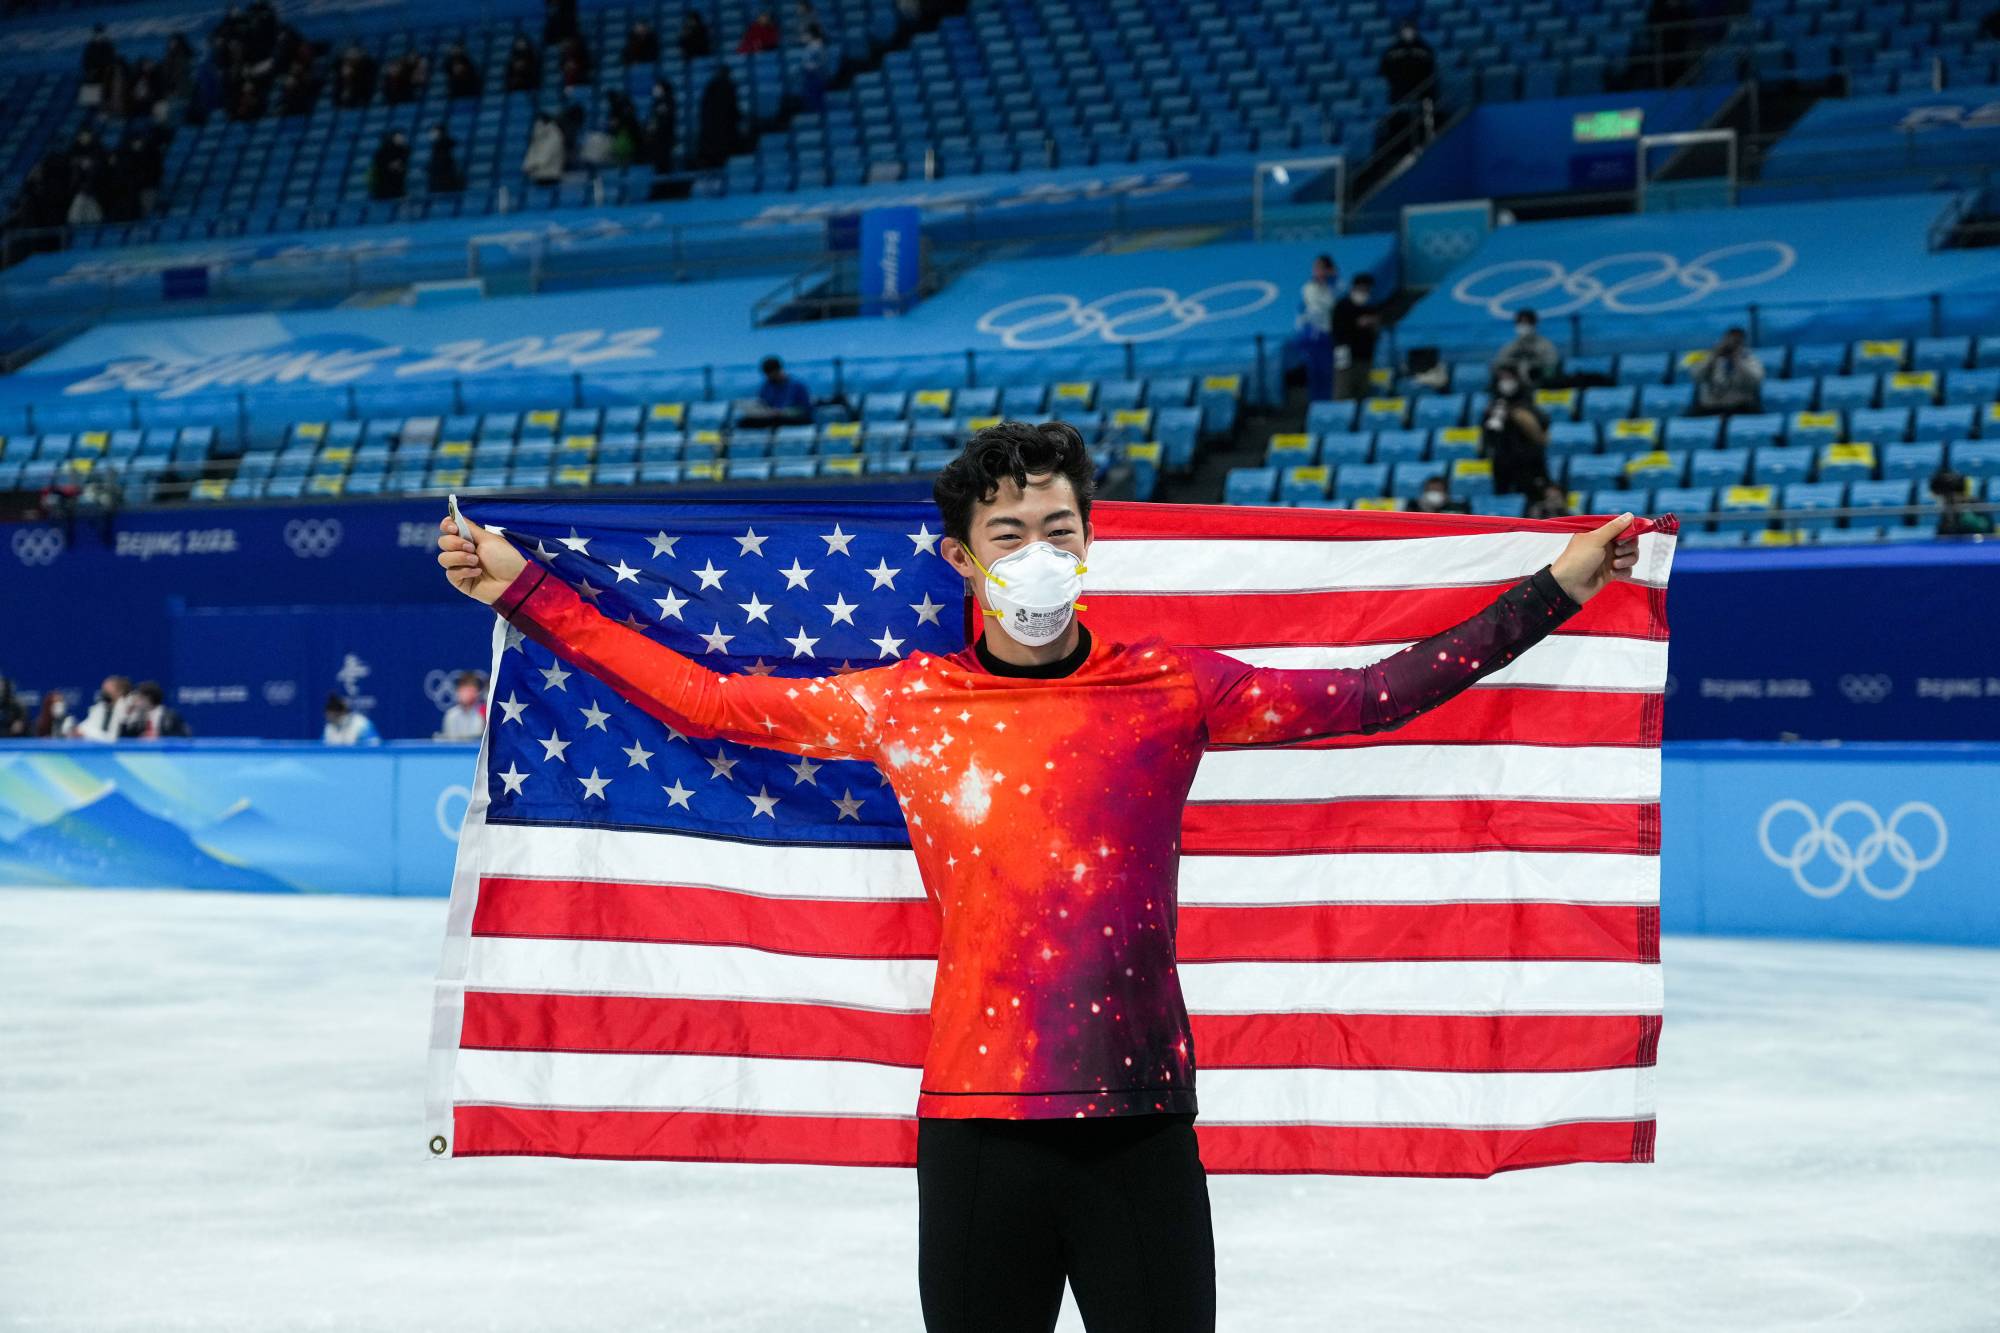 Nathan Chen of the U.S. celebrates after winning the gold medal in the free skating portion of the menÕs single skating event at the 2022 Winter Olympics in Beijing, on Thursday, Feb. 10, 2022. (Hiroko Masuike/The New York Times)